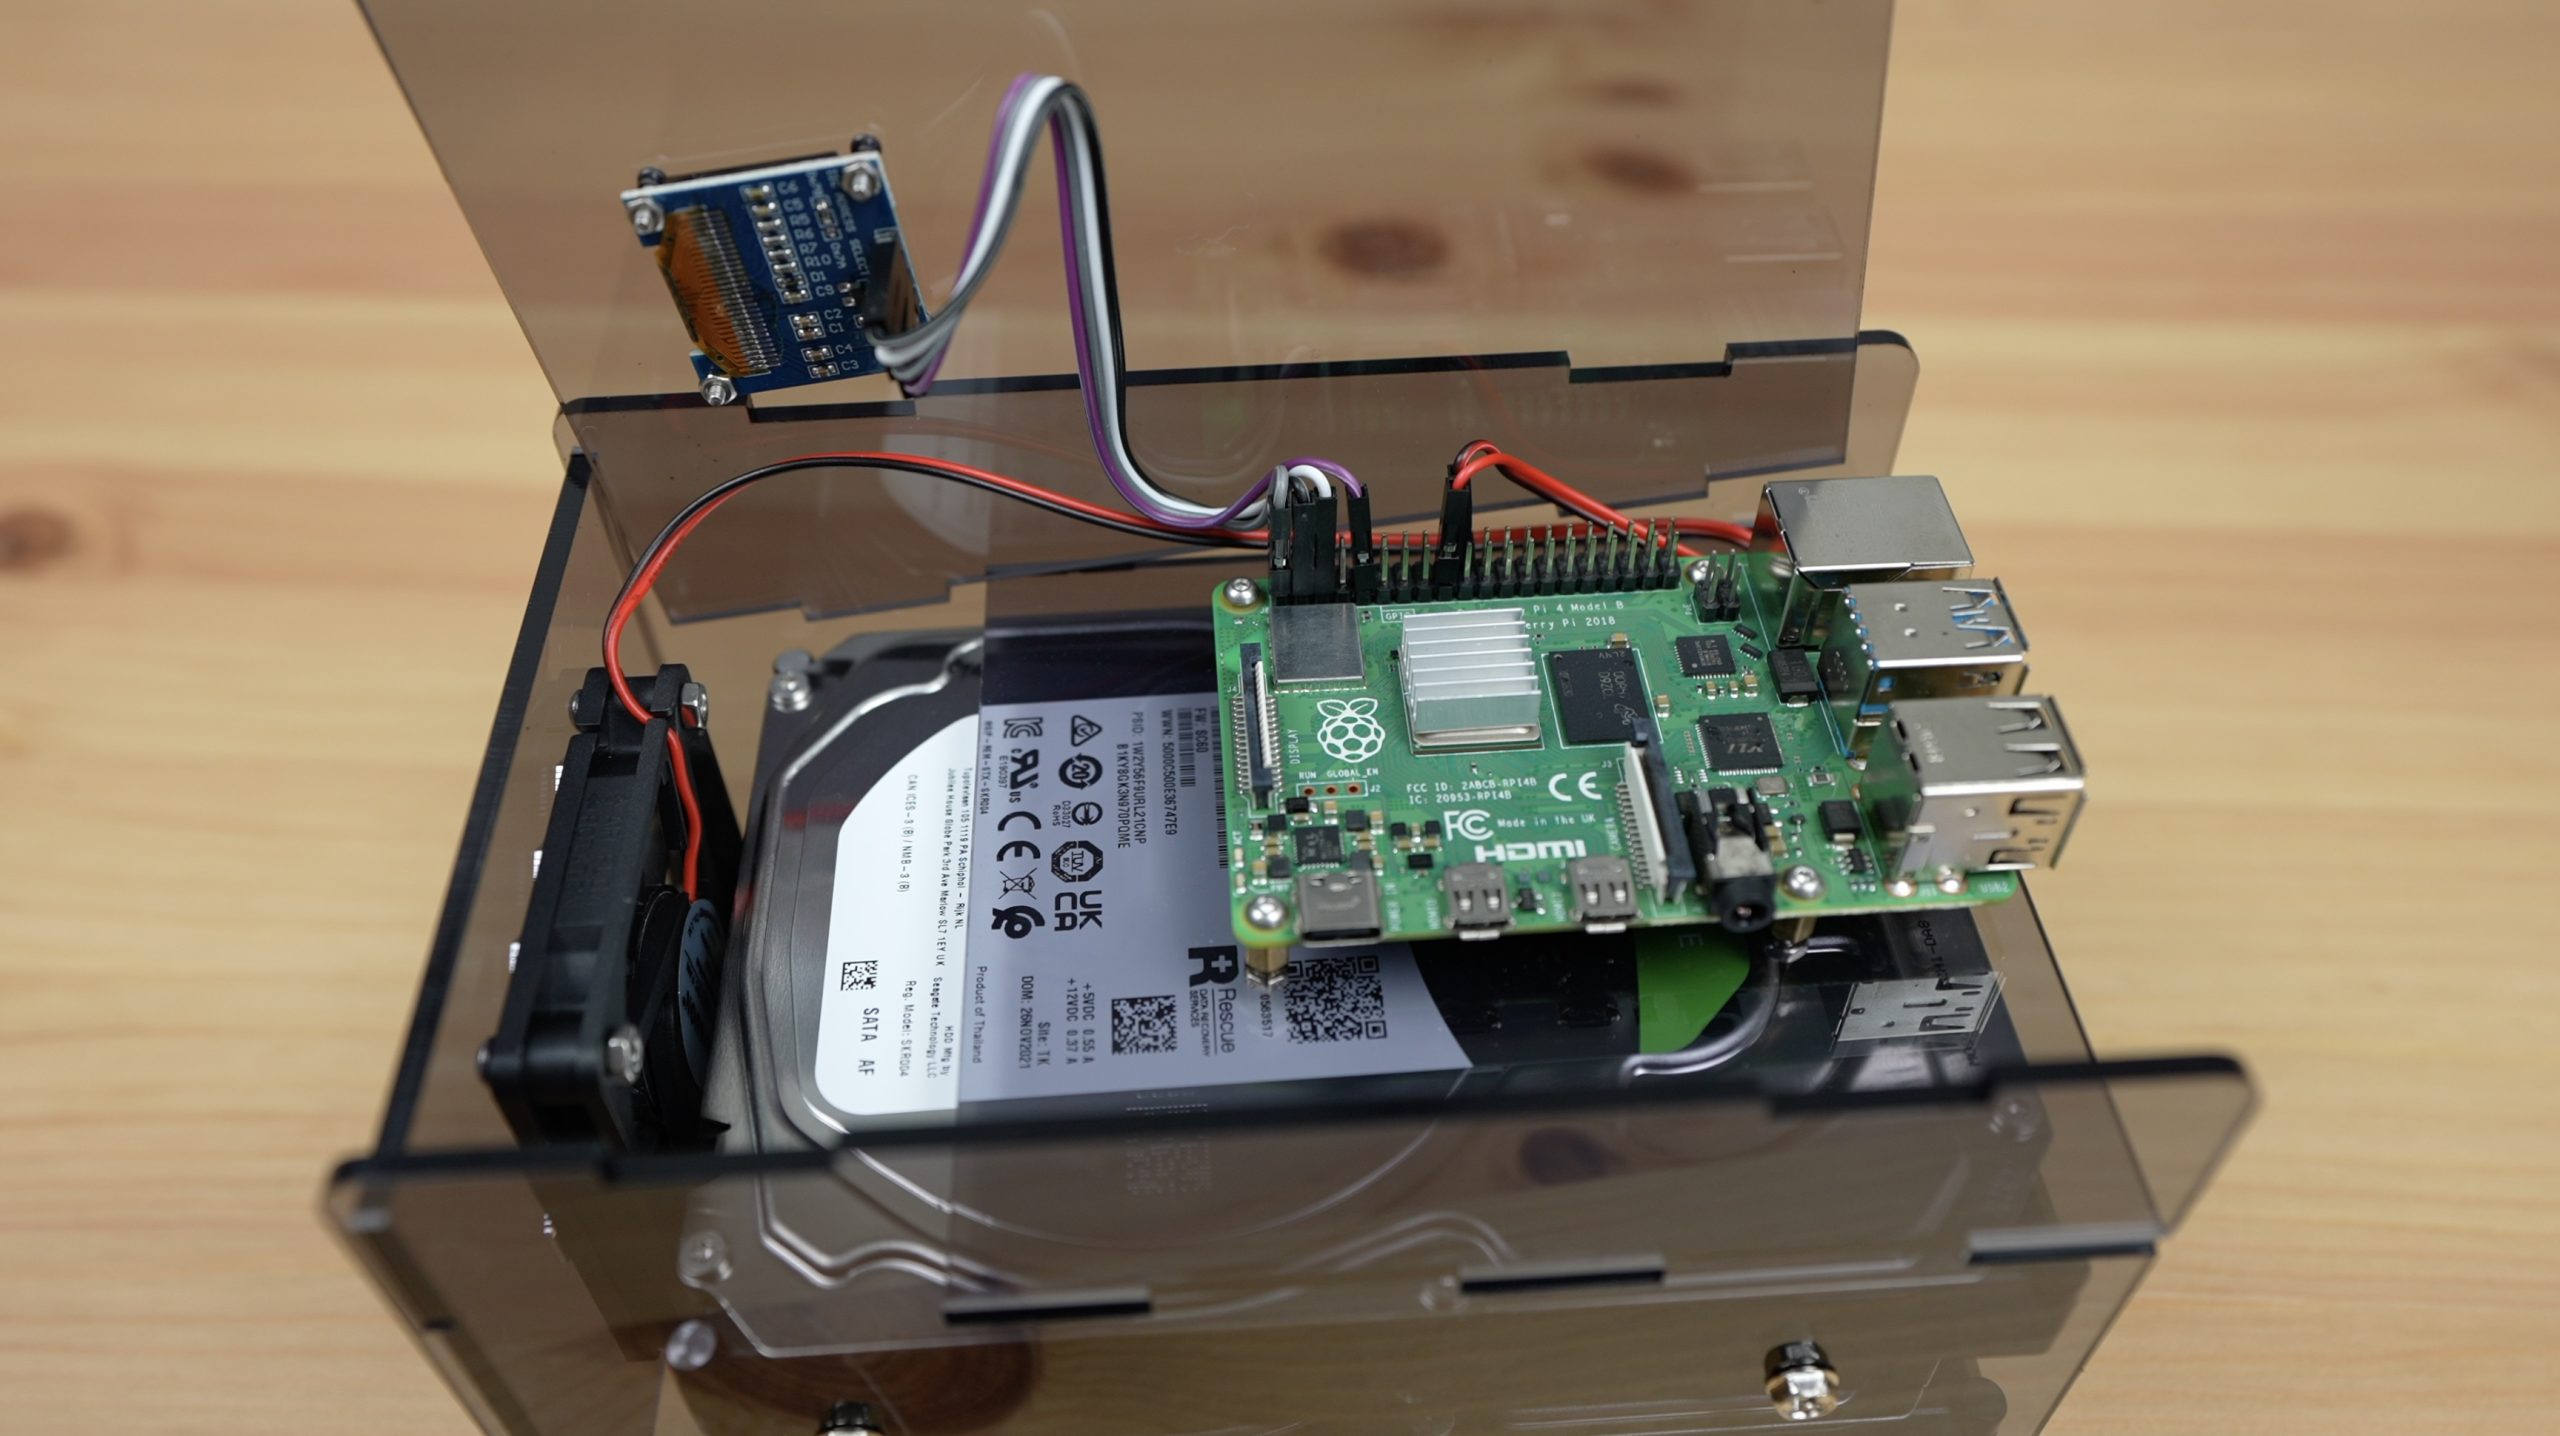 Raspberry Pi Installed In NAS And Display Connected